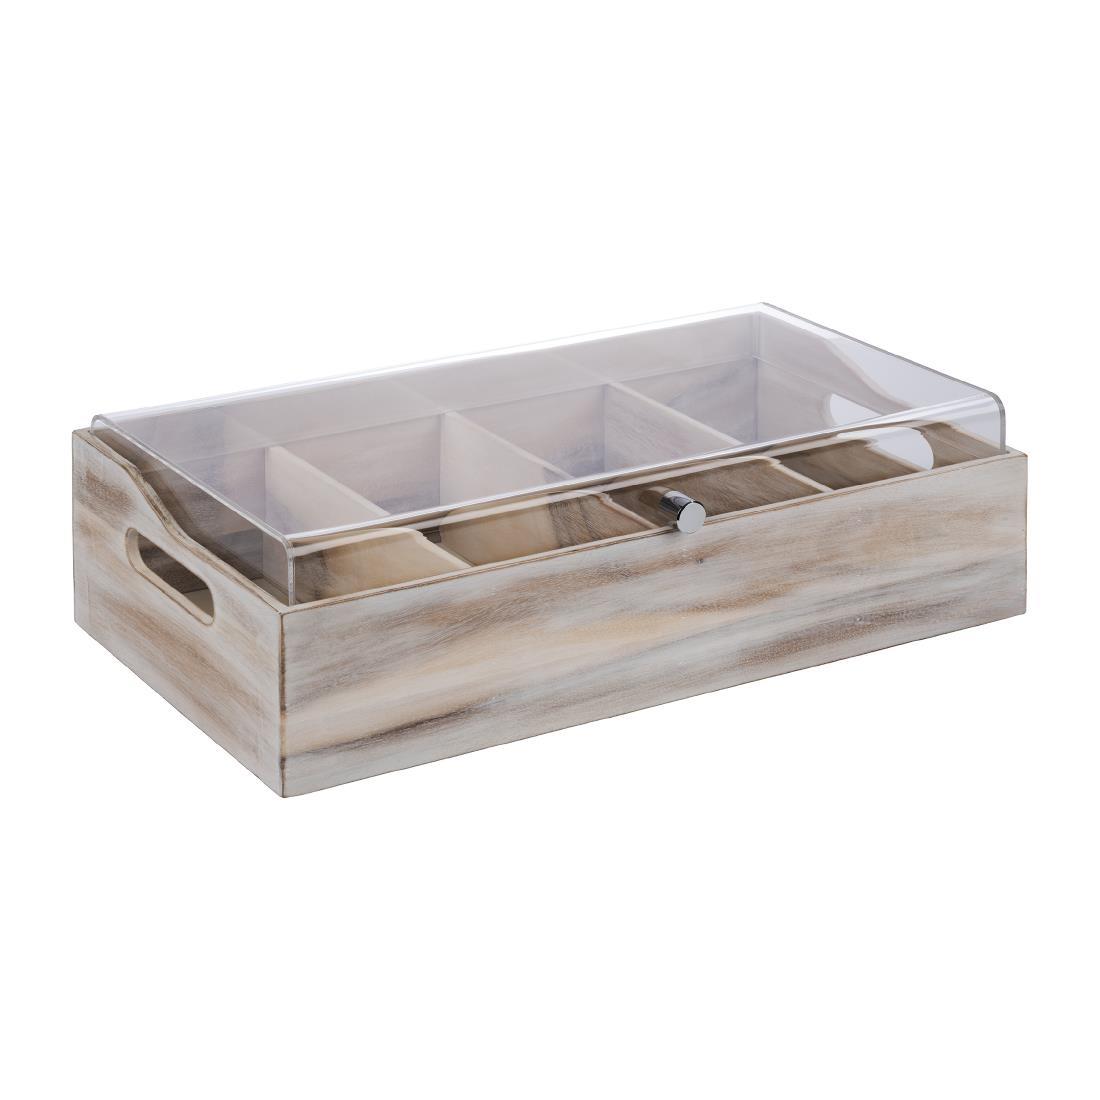 APS Cutlery Tray With Cover 510 x 280mm - FT157  - 1